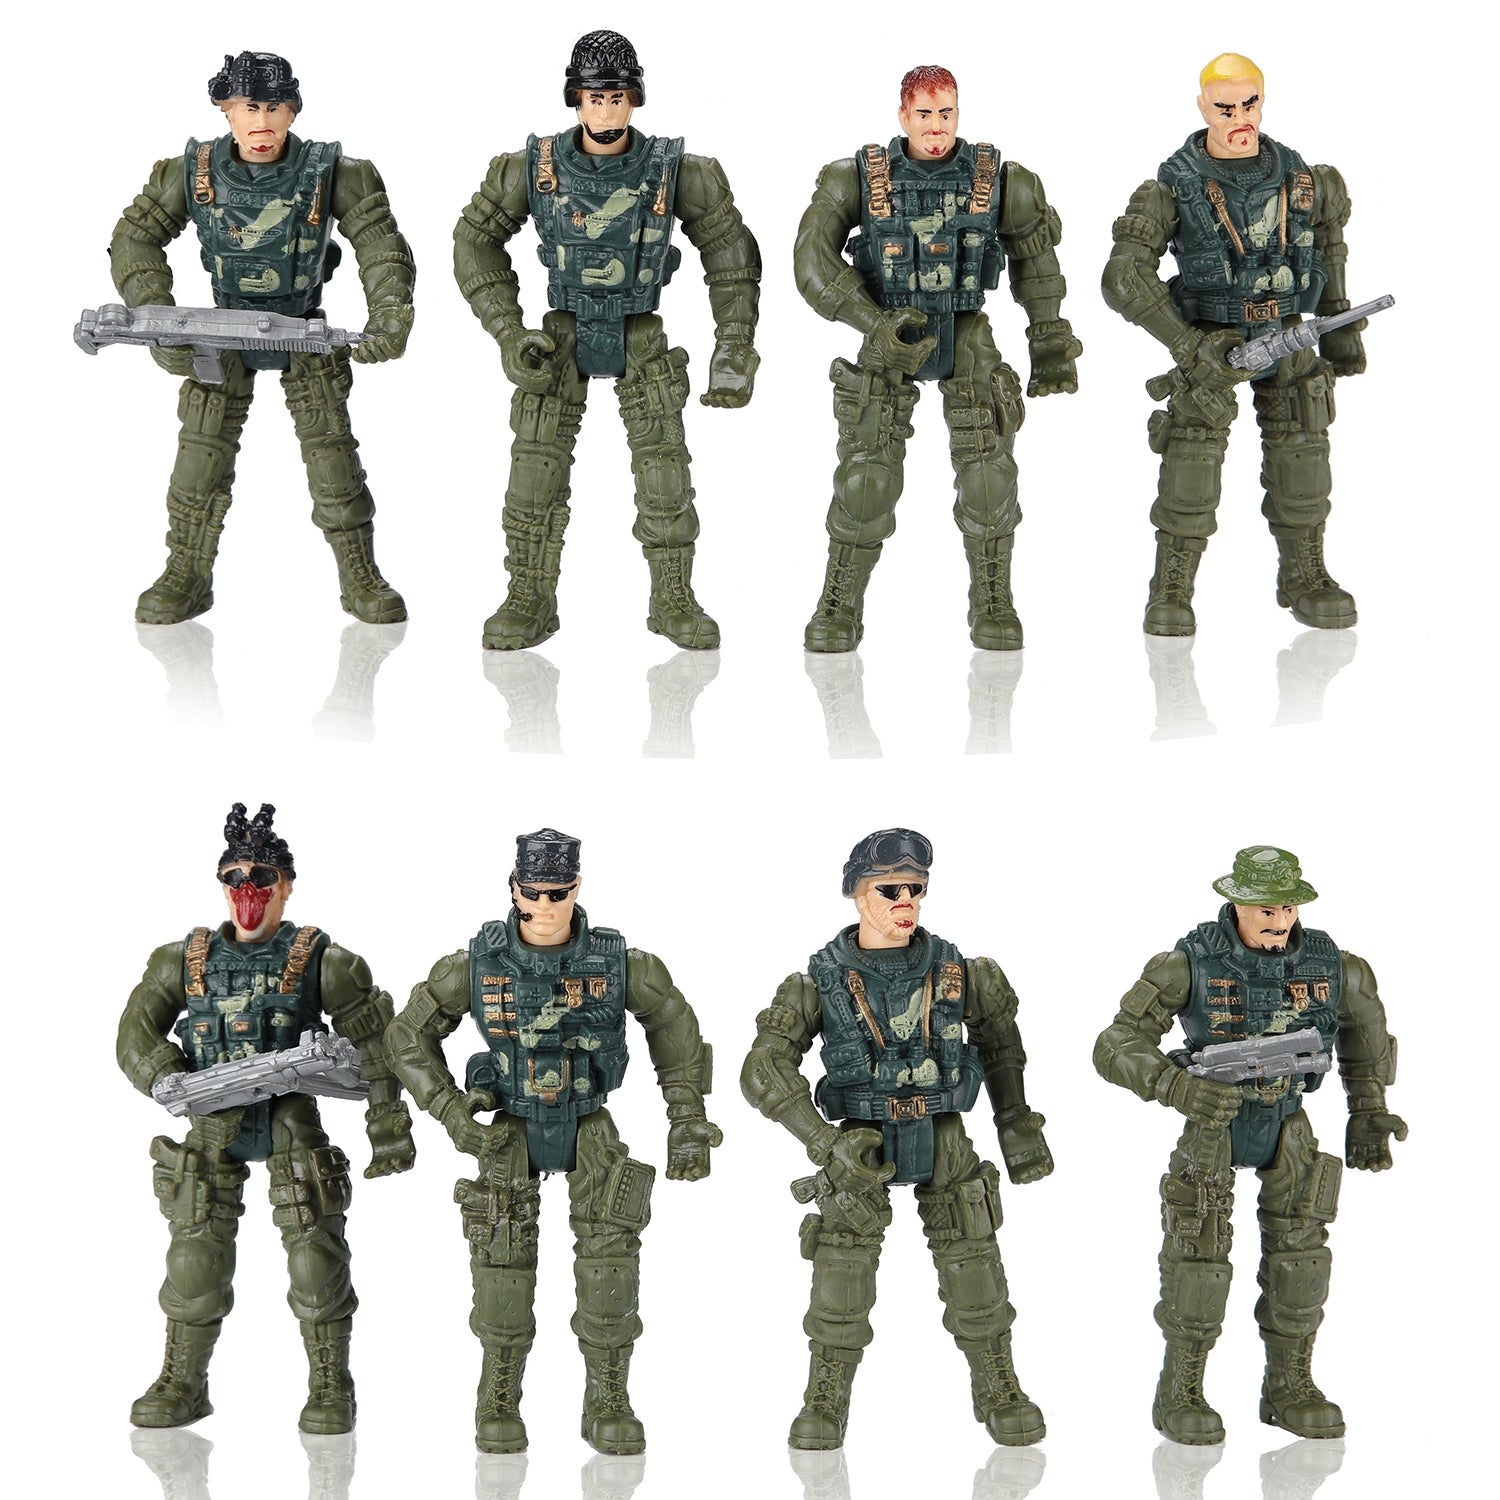 Soldier Action Figures Toy